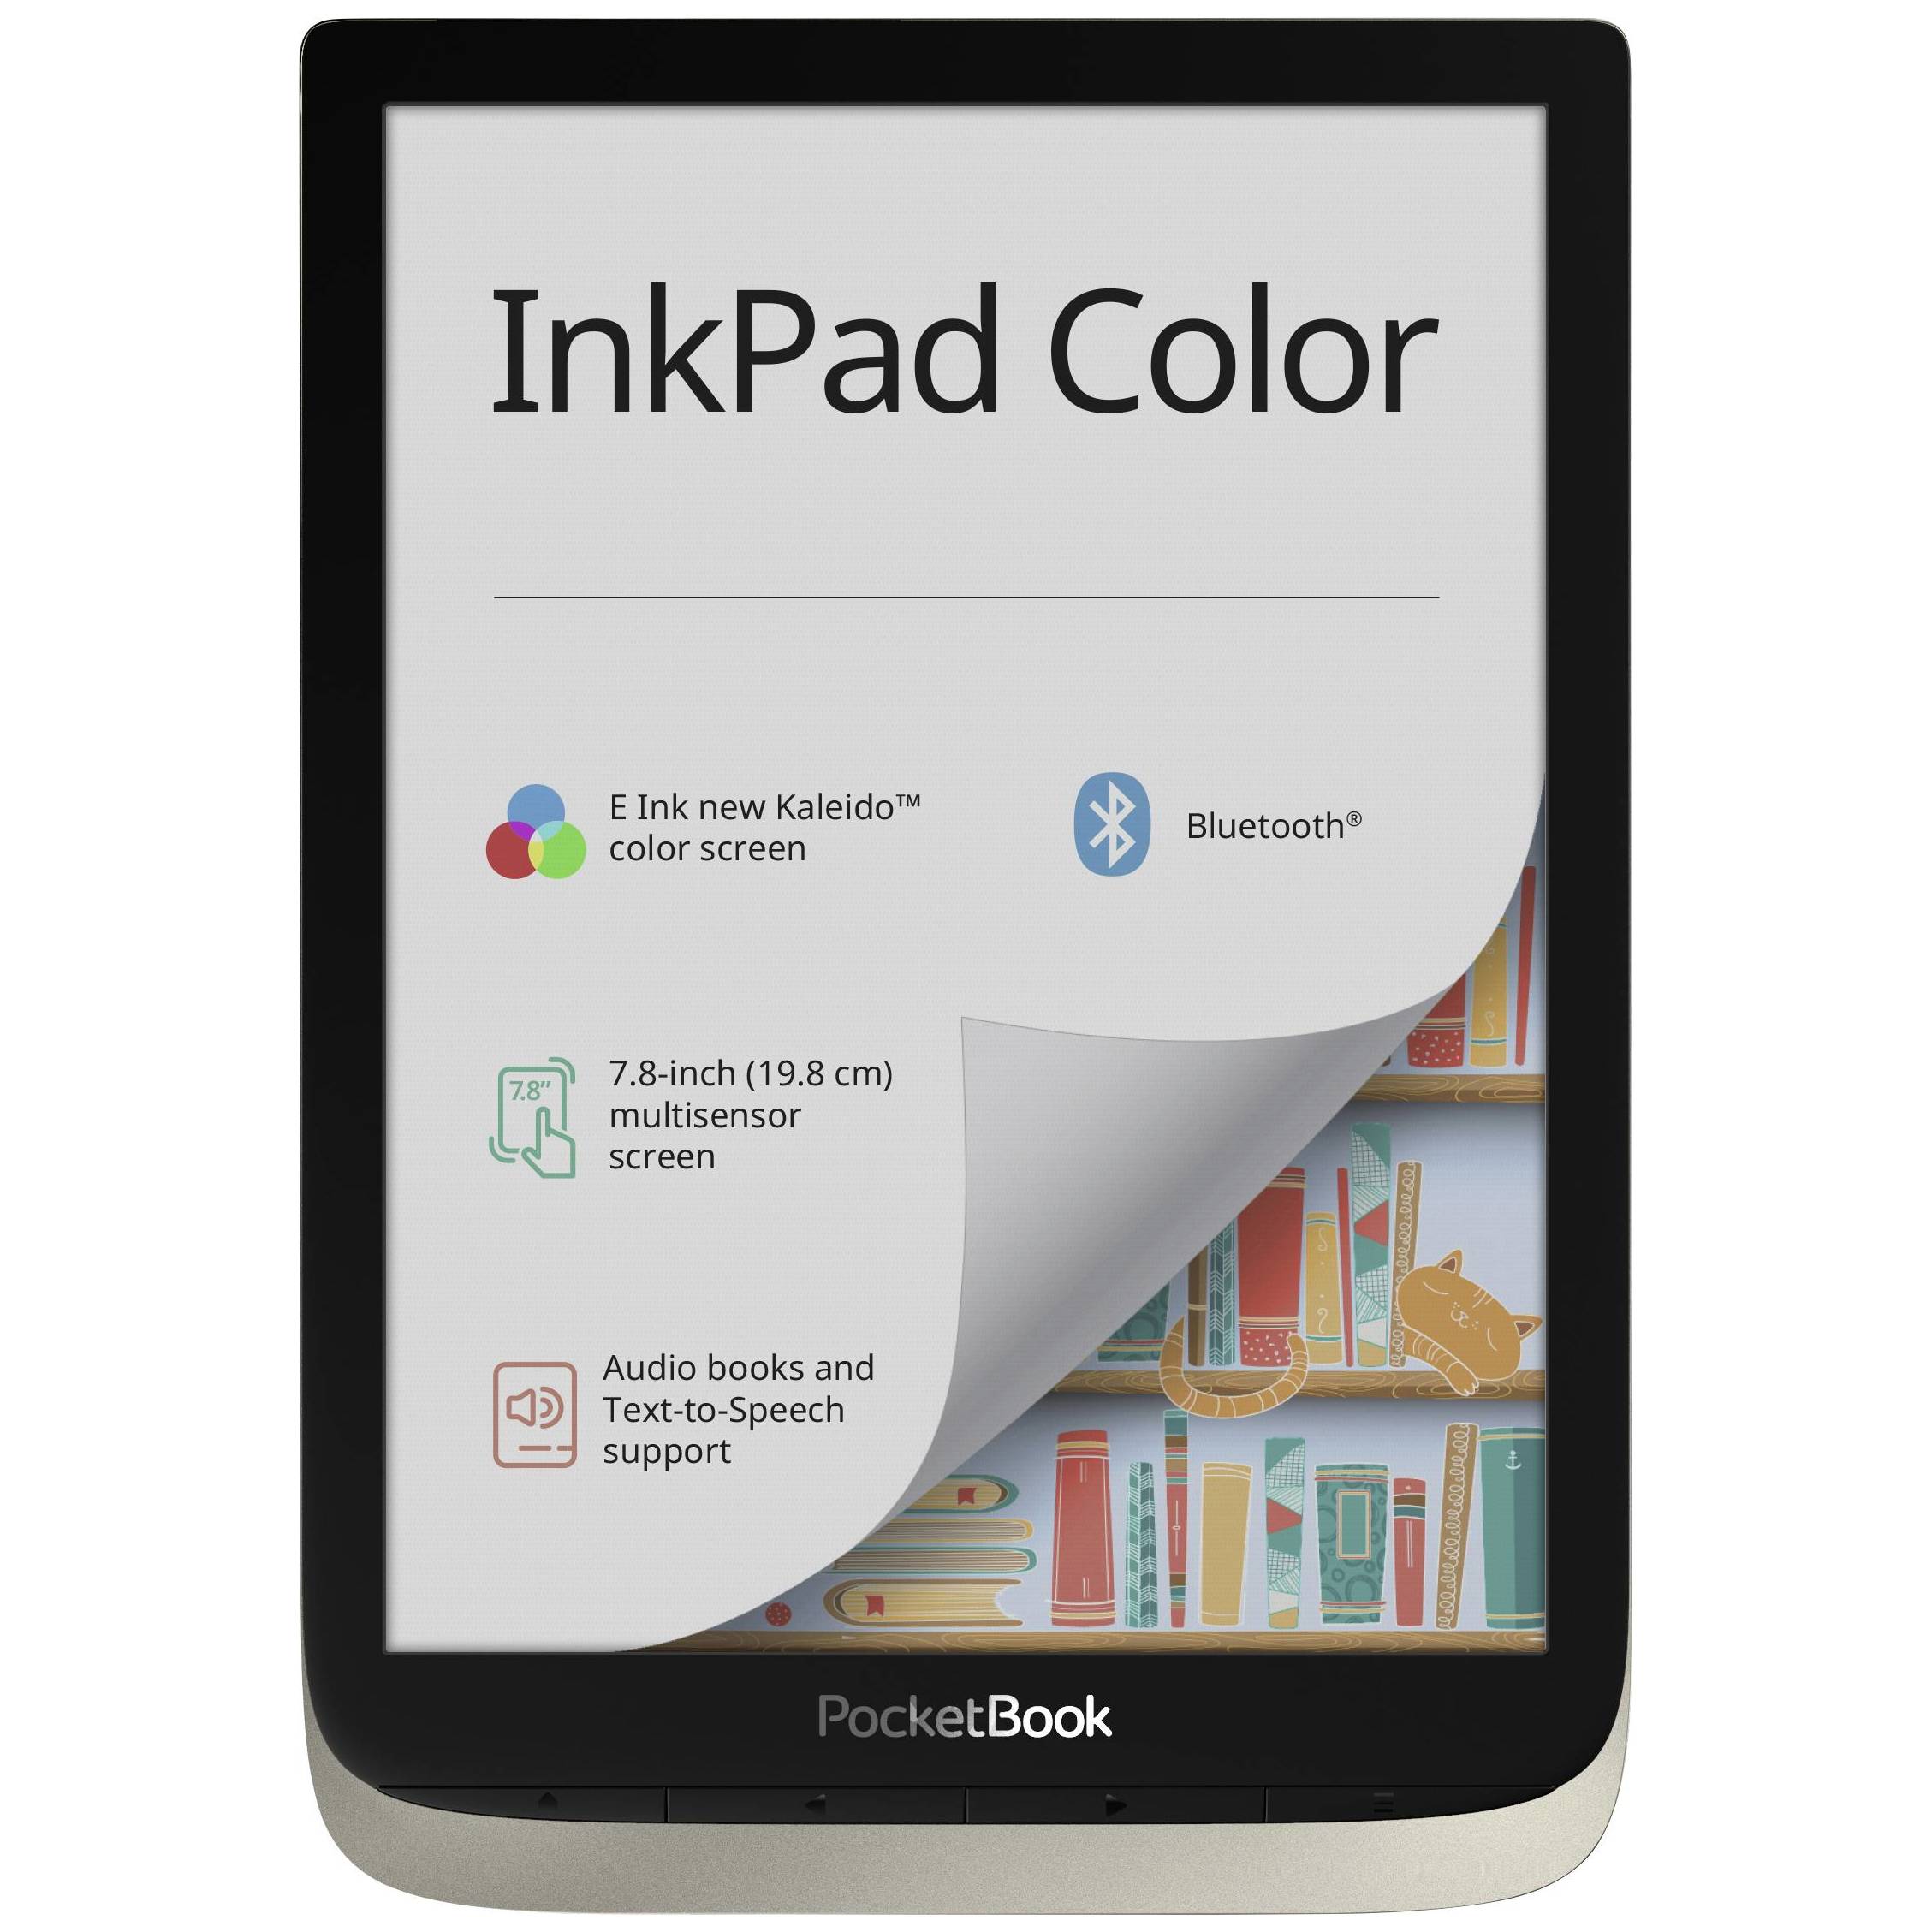 First Look at the Pocketbook InkPad Color 3 e-reader - Good e-Reader